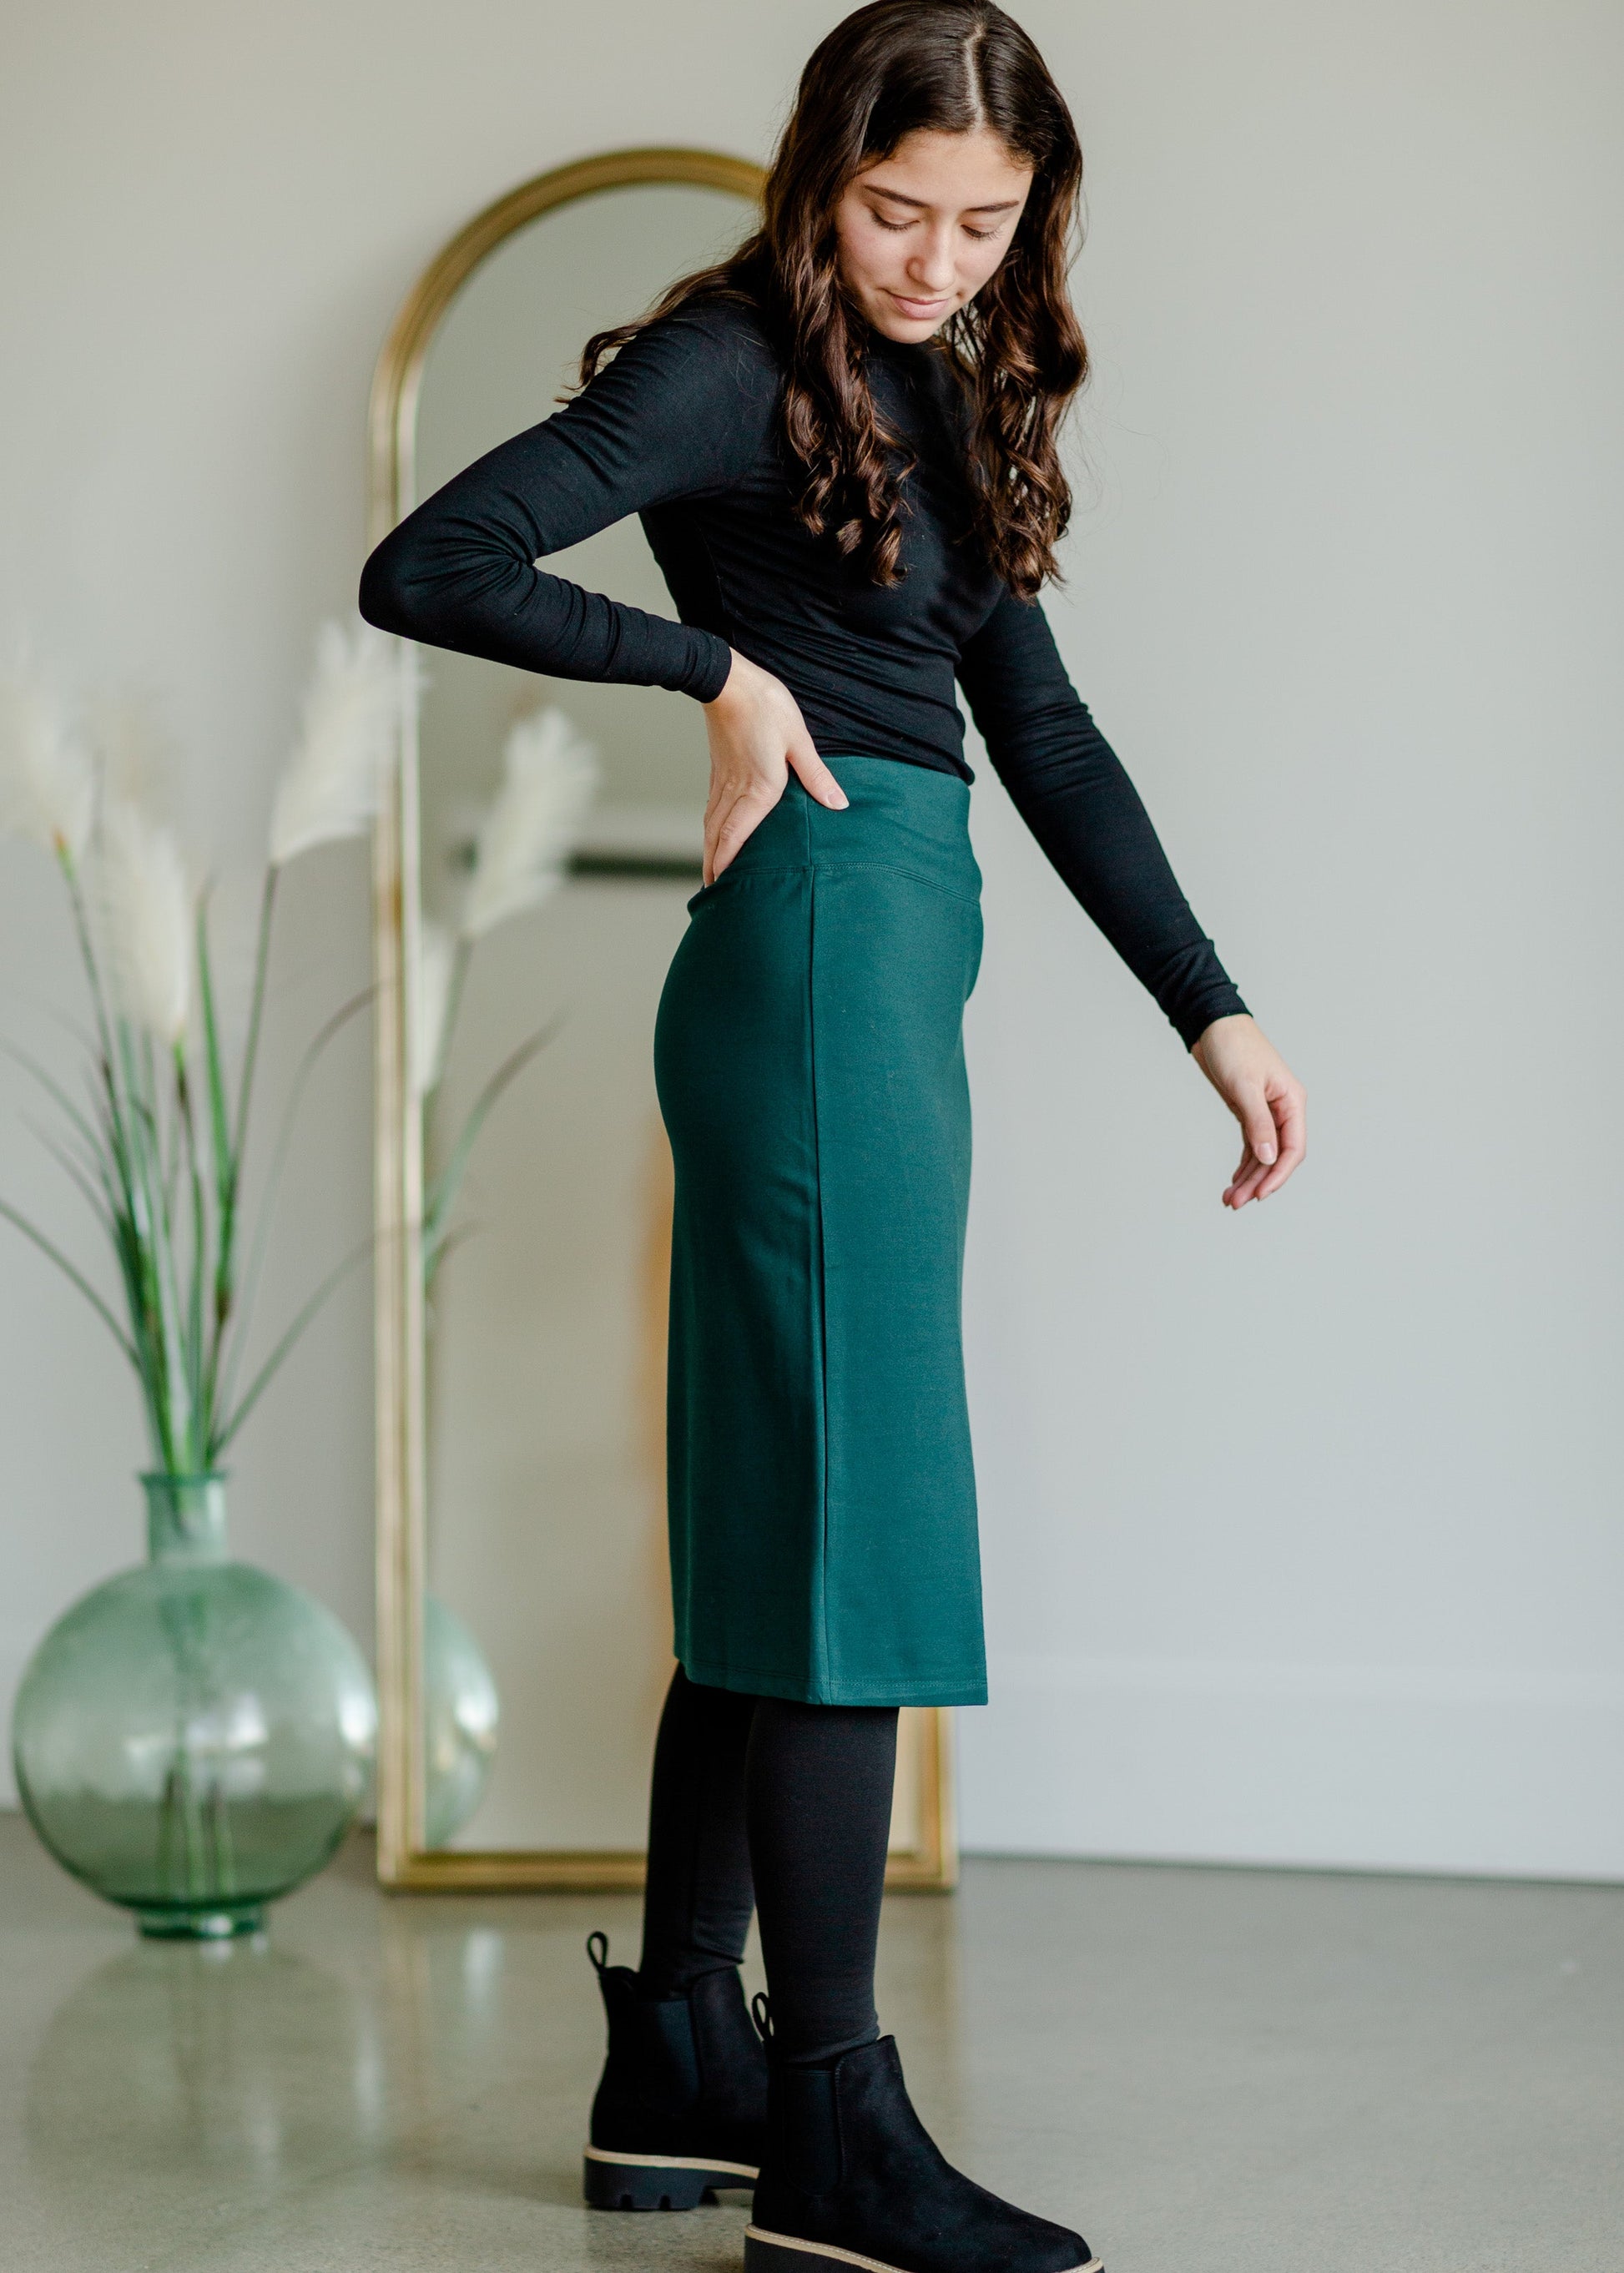 The High Waisted No-Cling Leggings are an Inherit Exclusive designed to prevent clinging! The high waisted leggings are soft and are full of stretch to keep you comfortable! Wear these no cling leggings with activewear, dresses, skirts, you name it! You will love these versatile leggings!